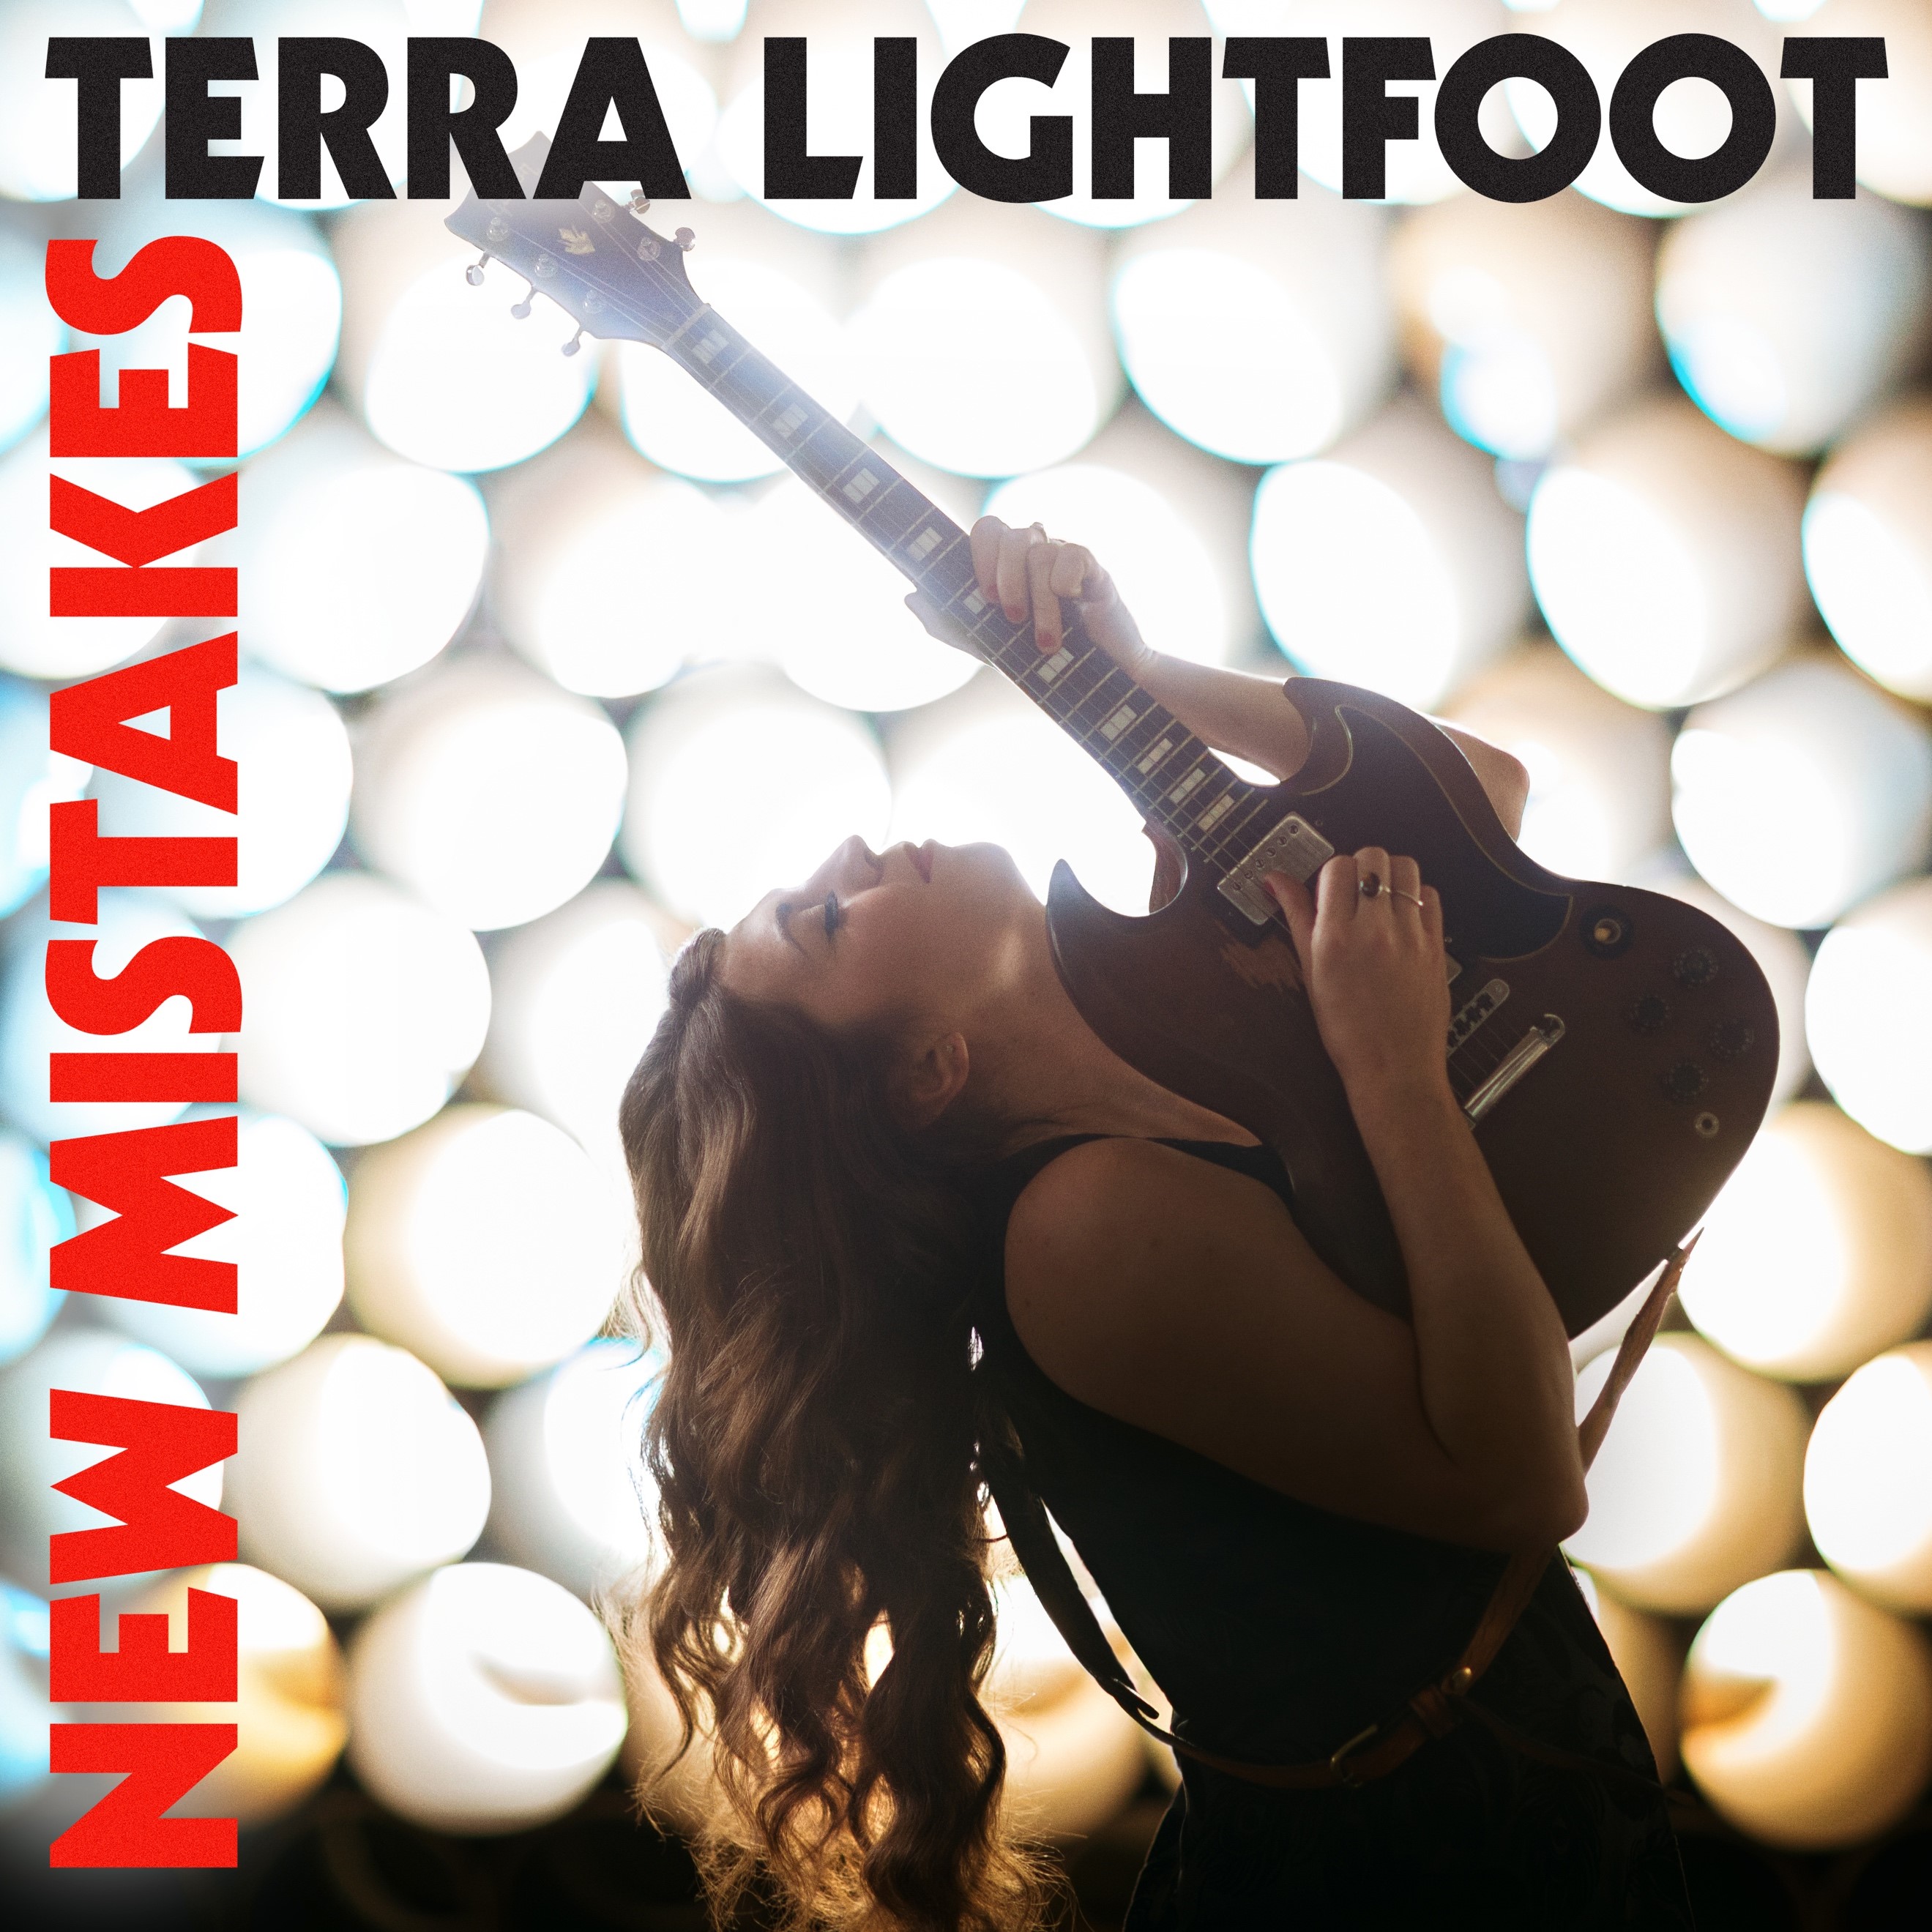 Terra Lightfoot new album out in October